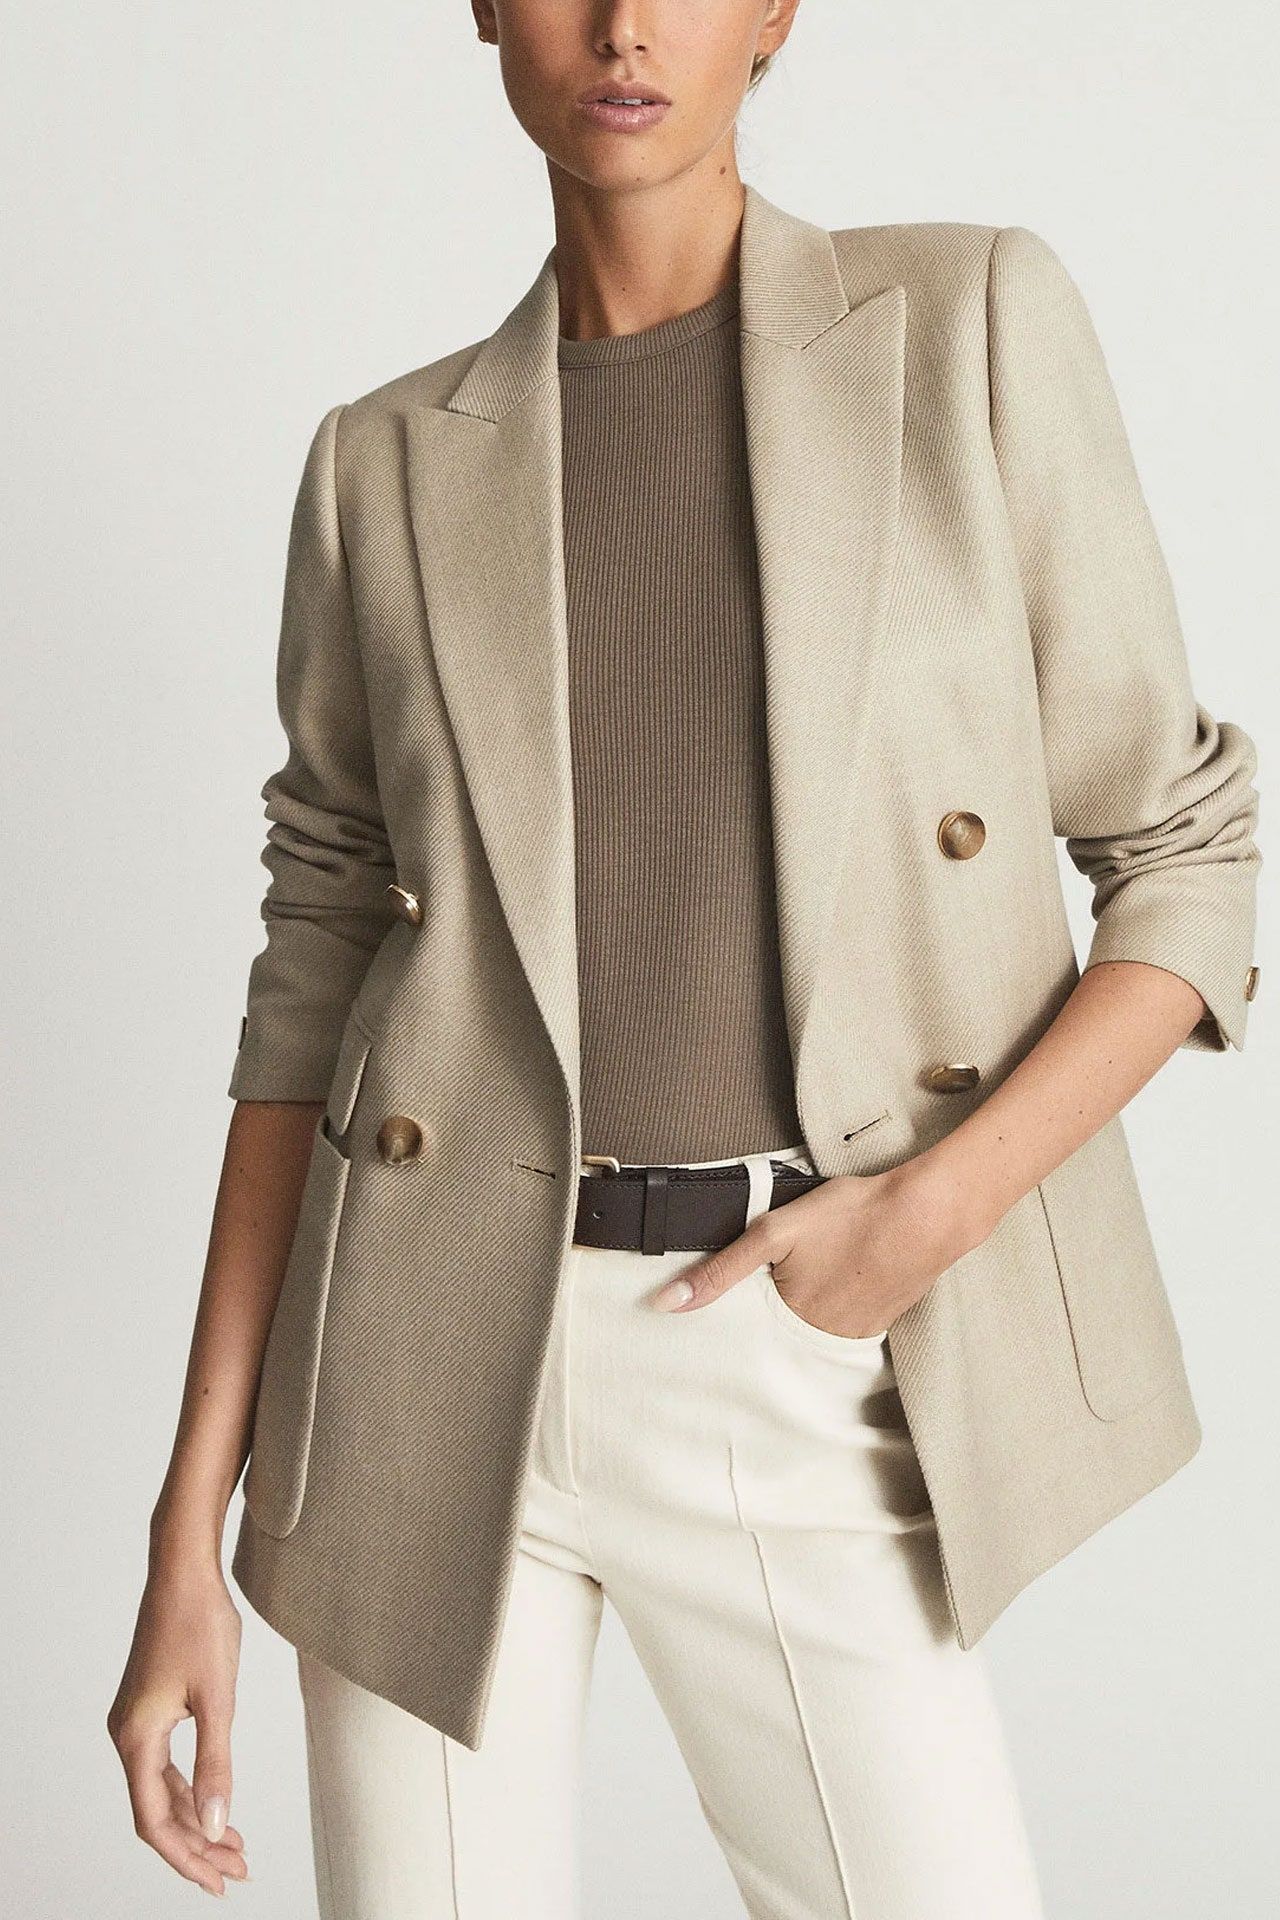 Classic Elegance: Cotton Blazers for Timeless Appeal